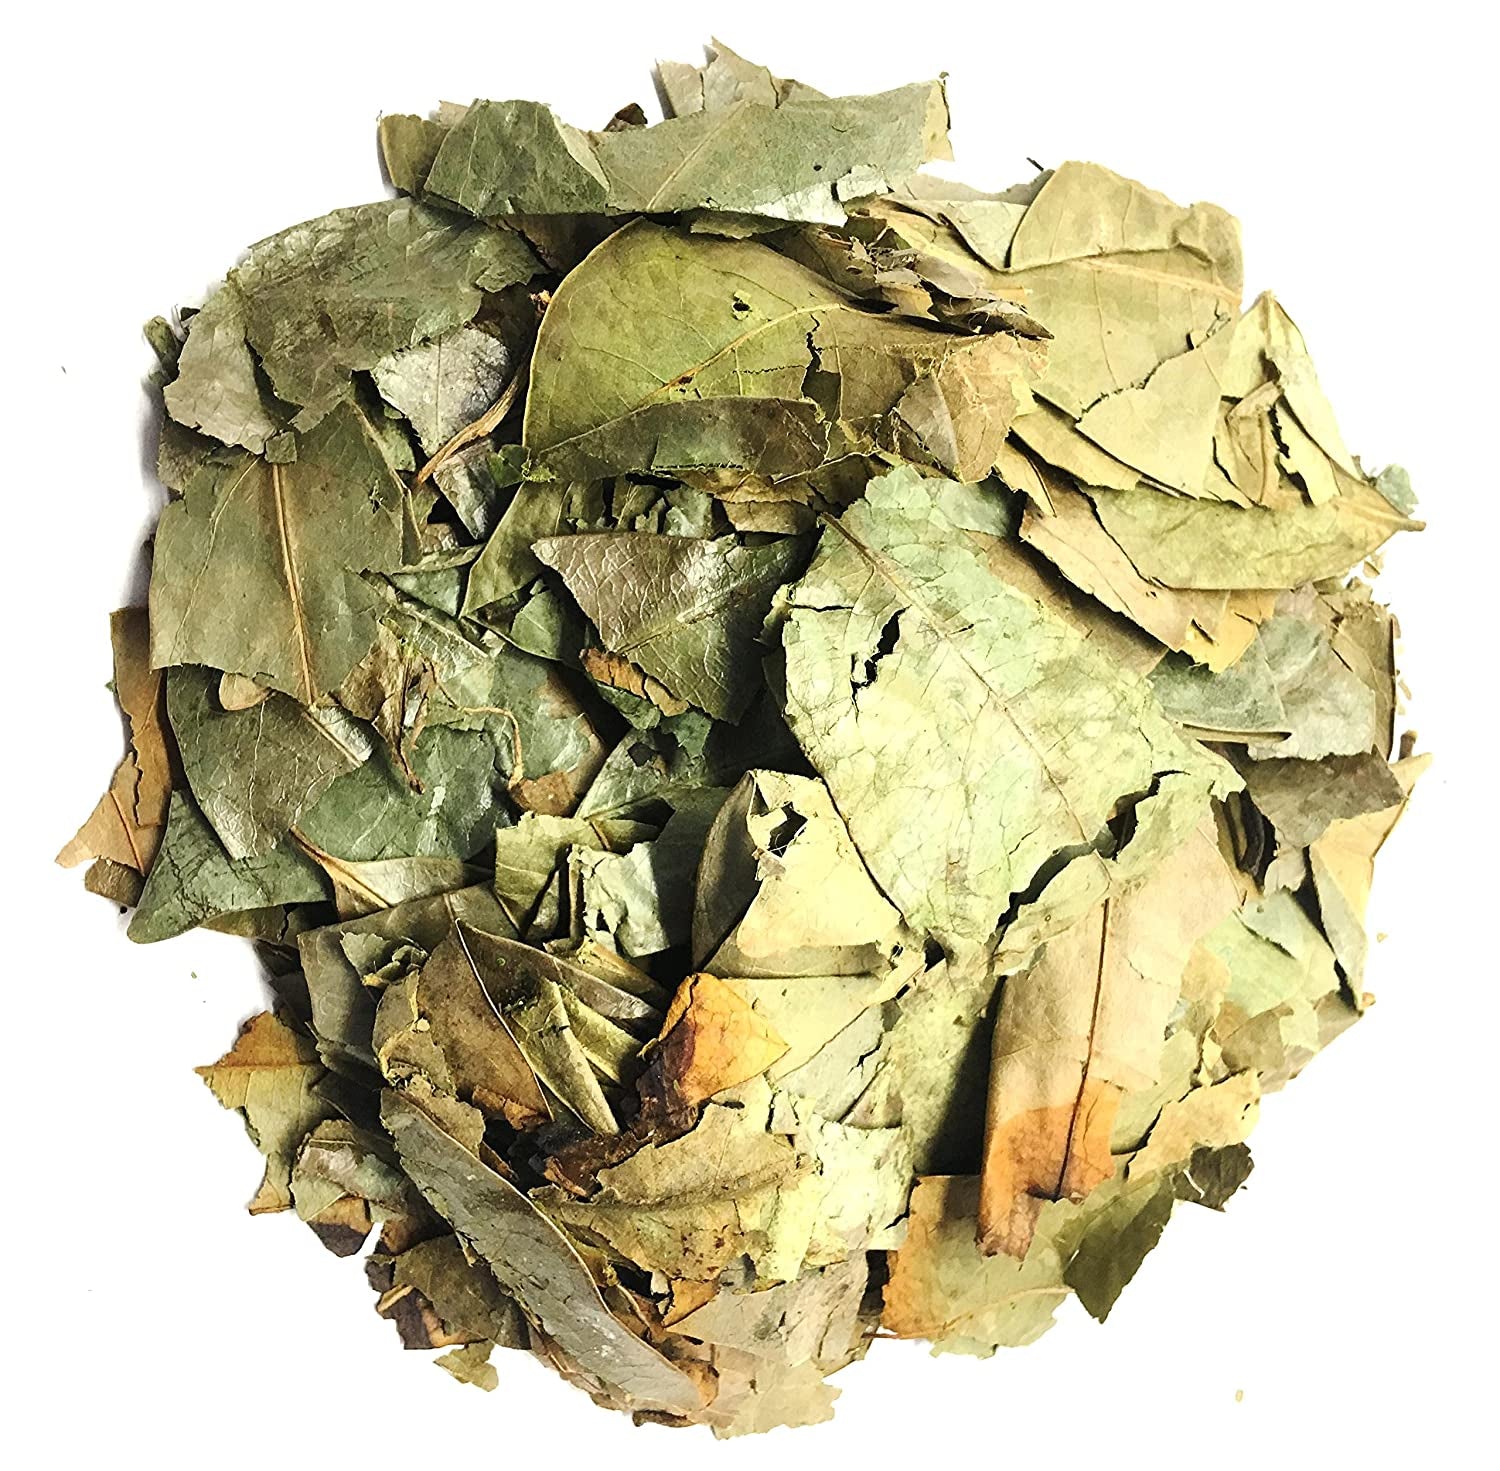 Soursop Leaf Tea - Herbal and Organic Graviola Leaves from Peru - for the Maintenance of Good Health - Zip-Lock Bag (35G) 1.05Oz - 100% Natural and Caffeine Free Guanabana